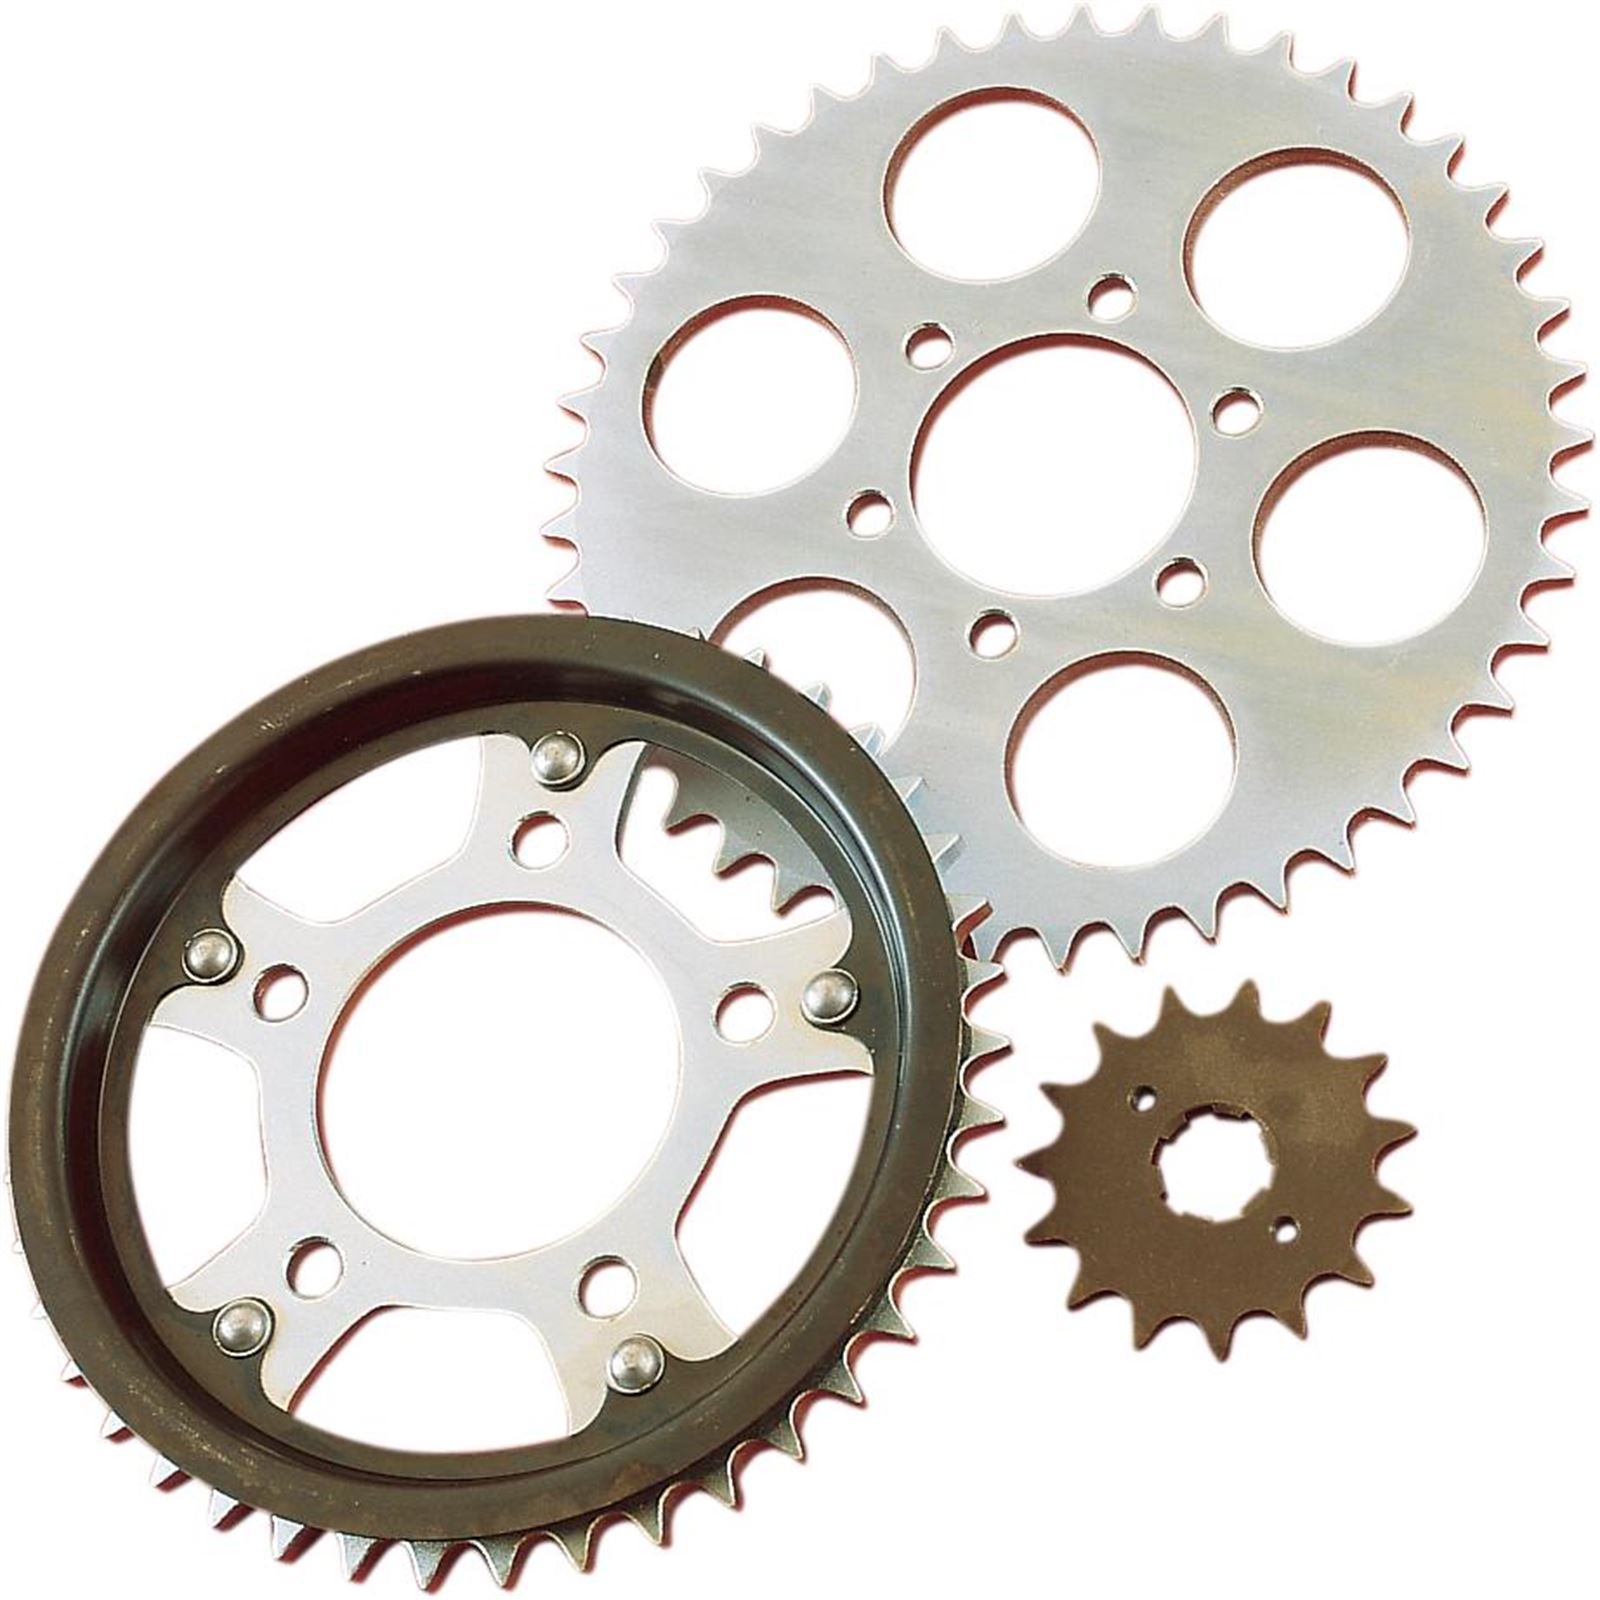 Parts Unlimited Counter Shaft Sprocket for Honda 420 - 12-Tooth